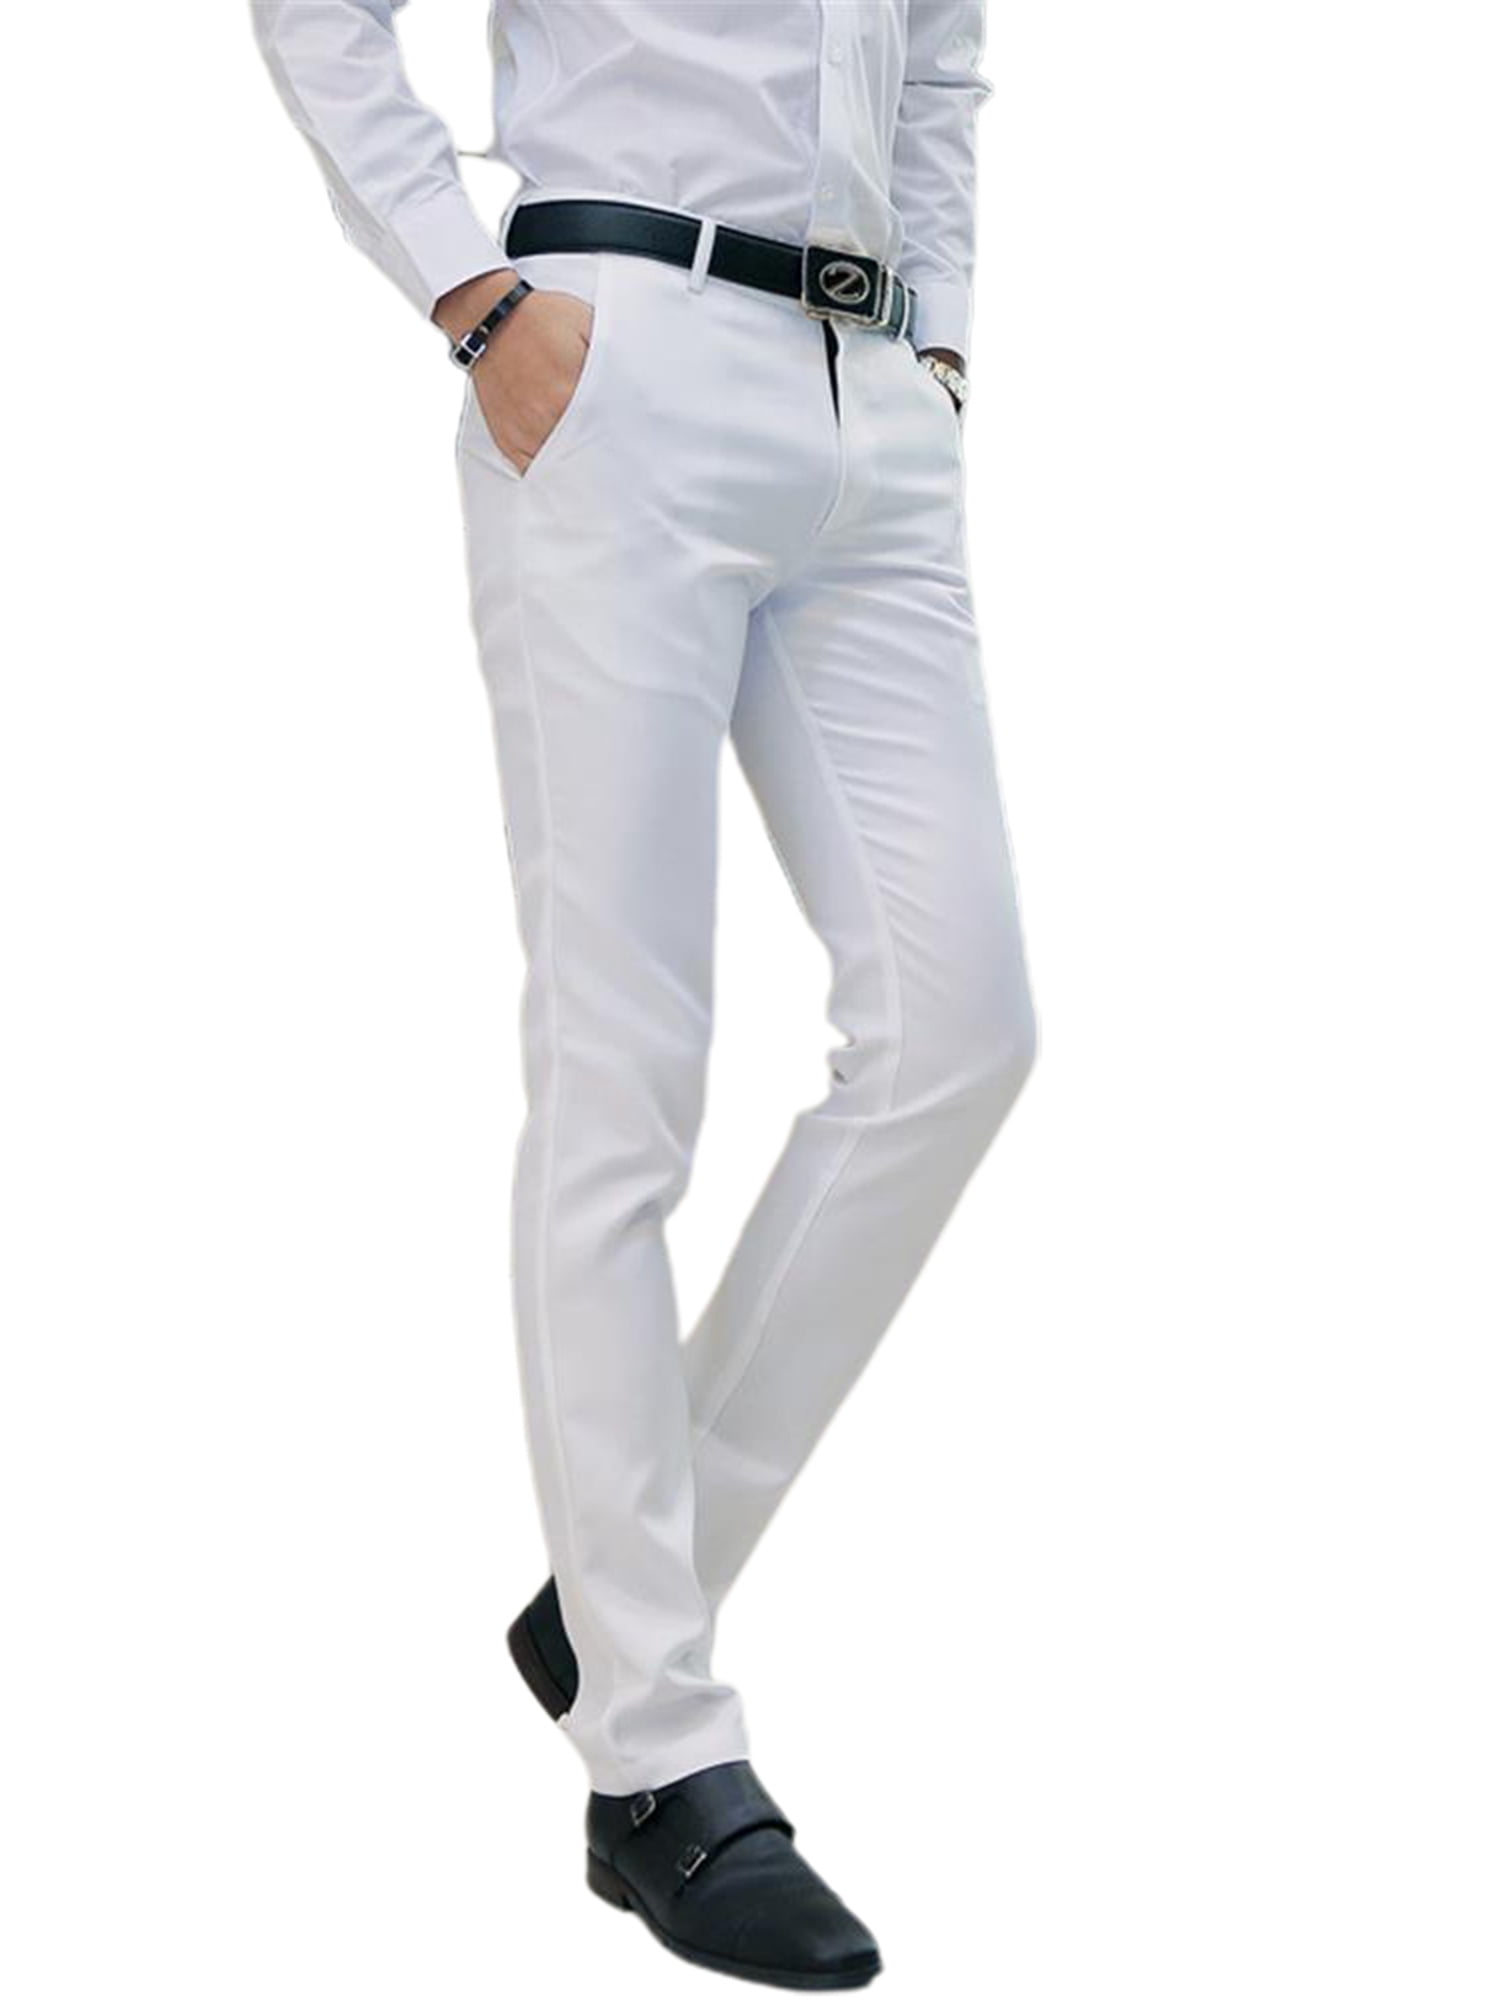 Mens Formal Business Chinos Dress Pants Slim Fit Casual Solid Work Wear Trousers 